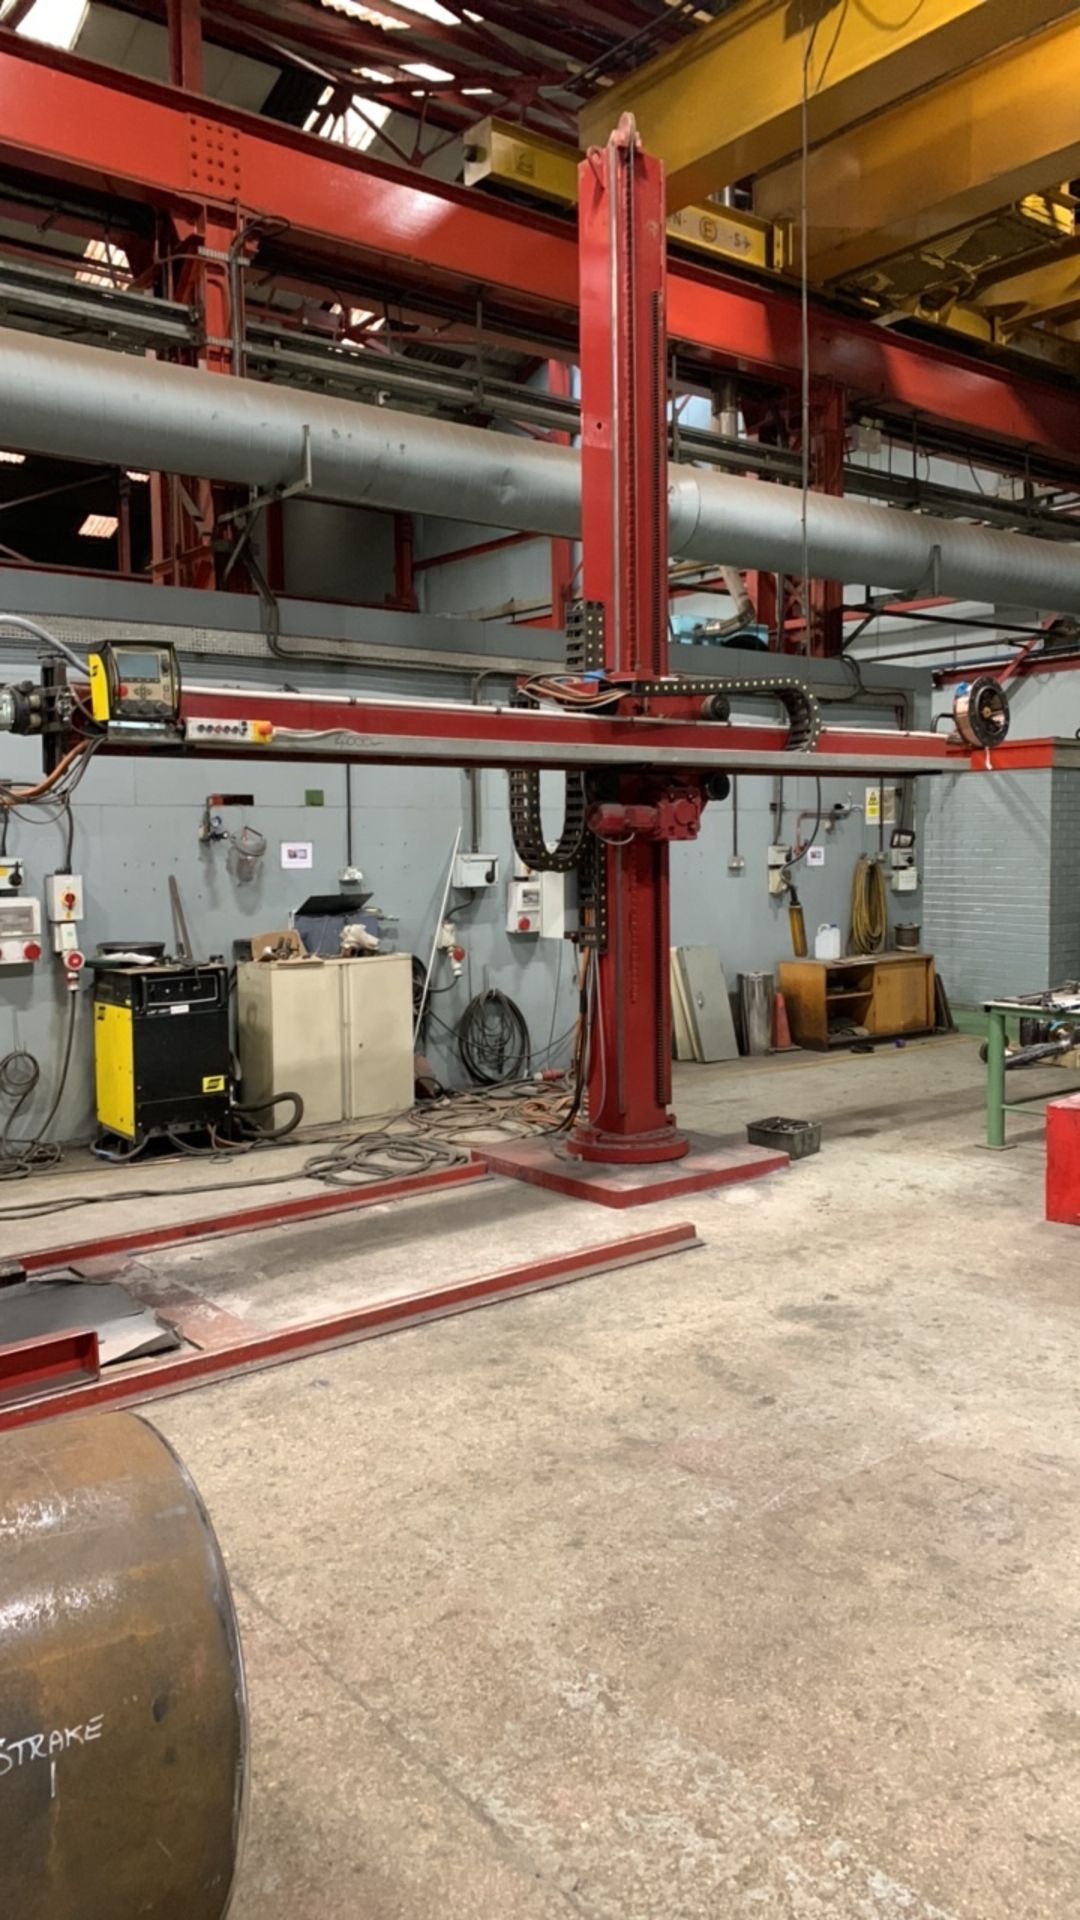 Column & Boom Type Sub Arc Welding System with Red-D-Arc Model MD4MX4M, Serial No. 6300, Esab LAF 10